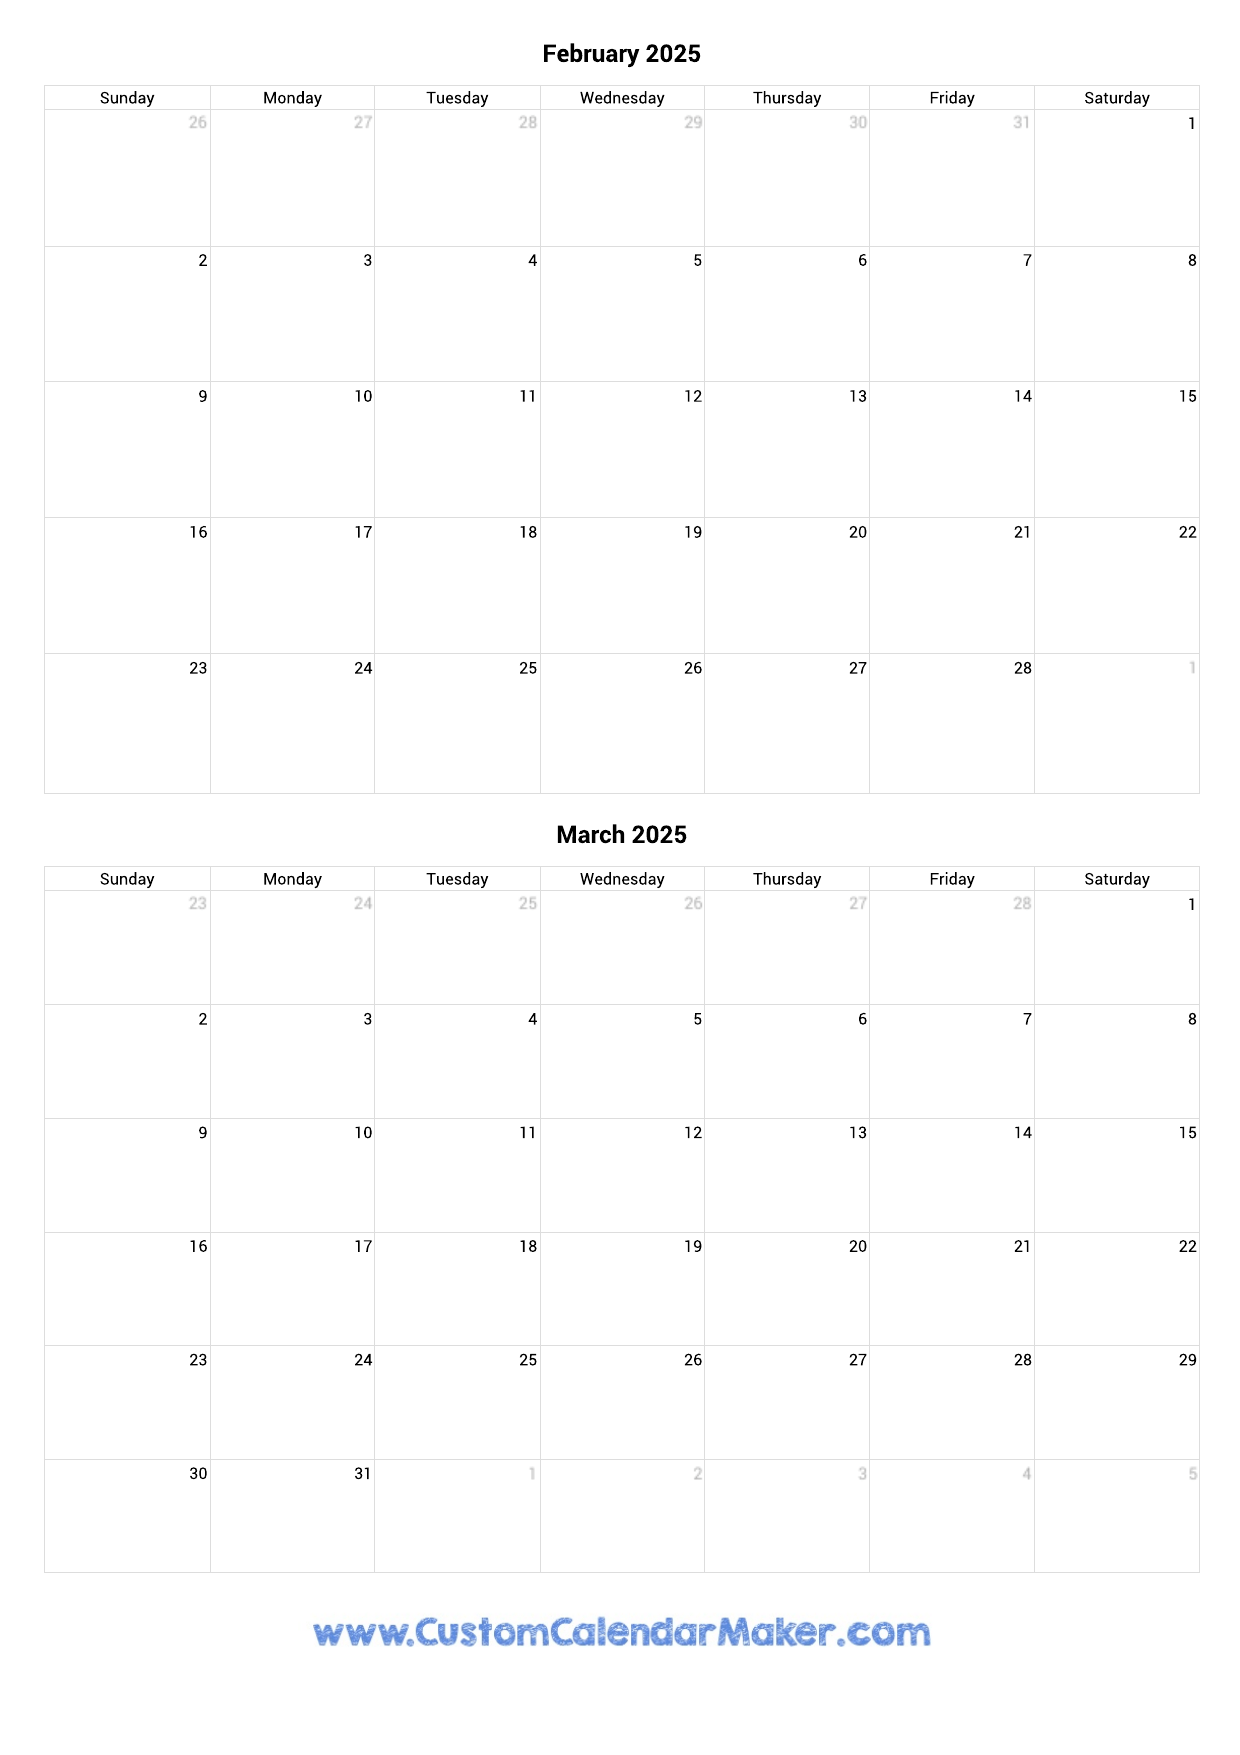 February And March 2025 Calendar